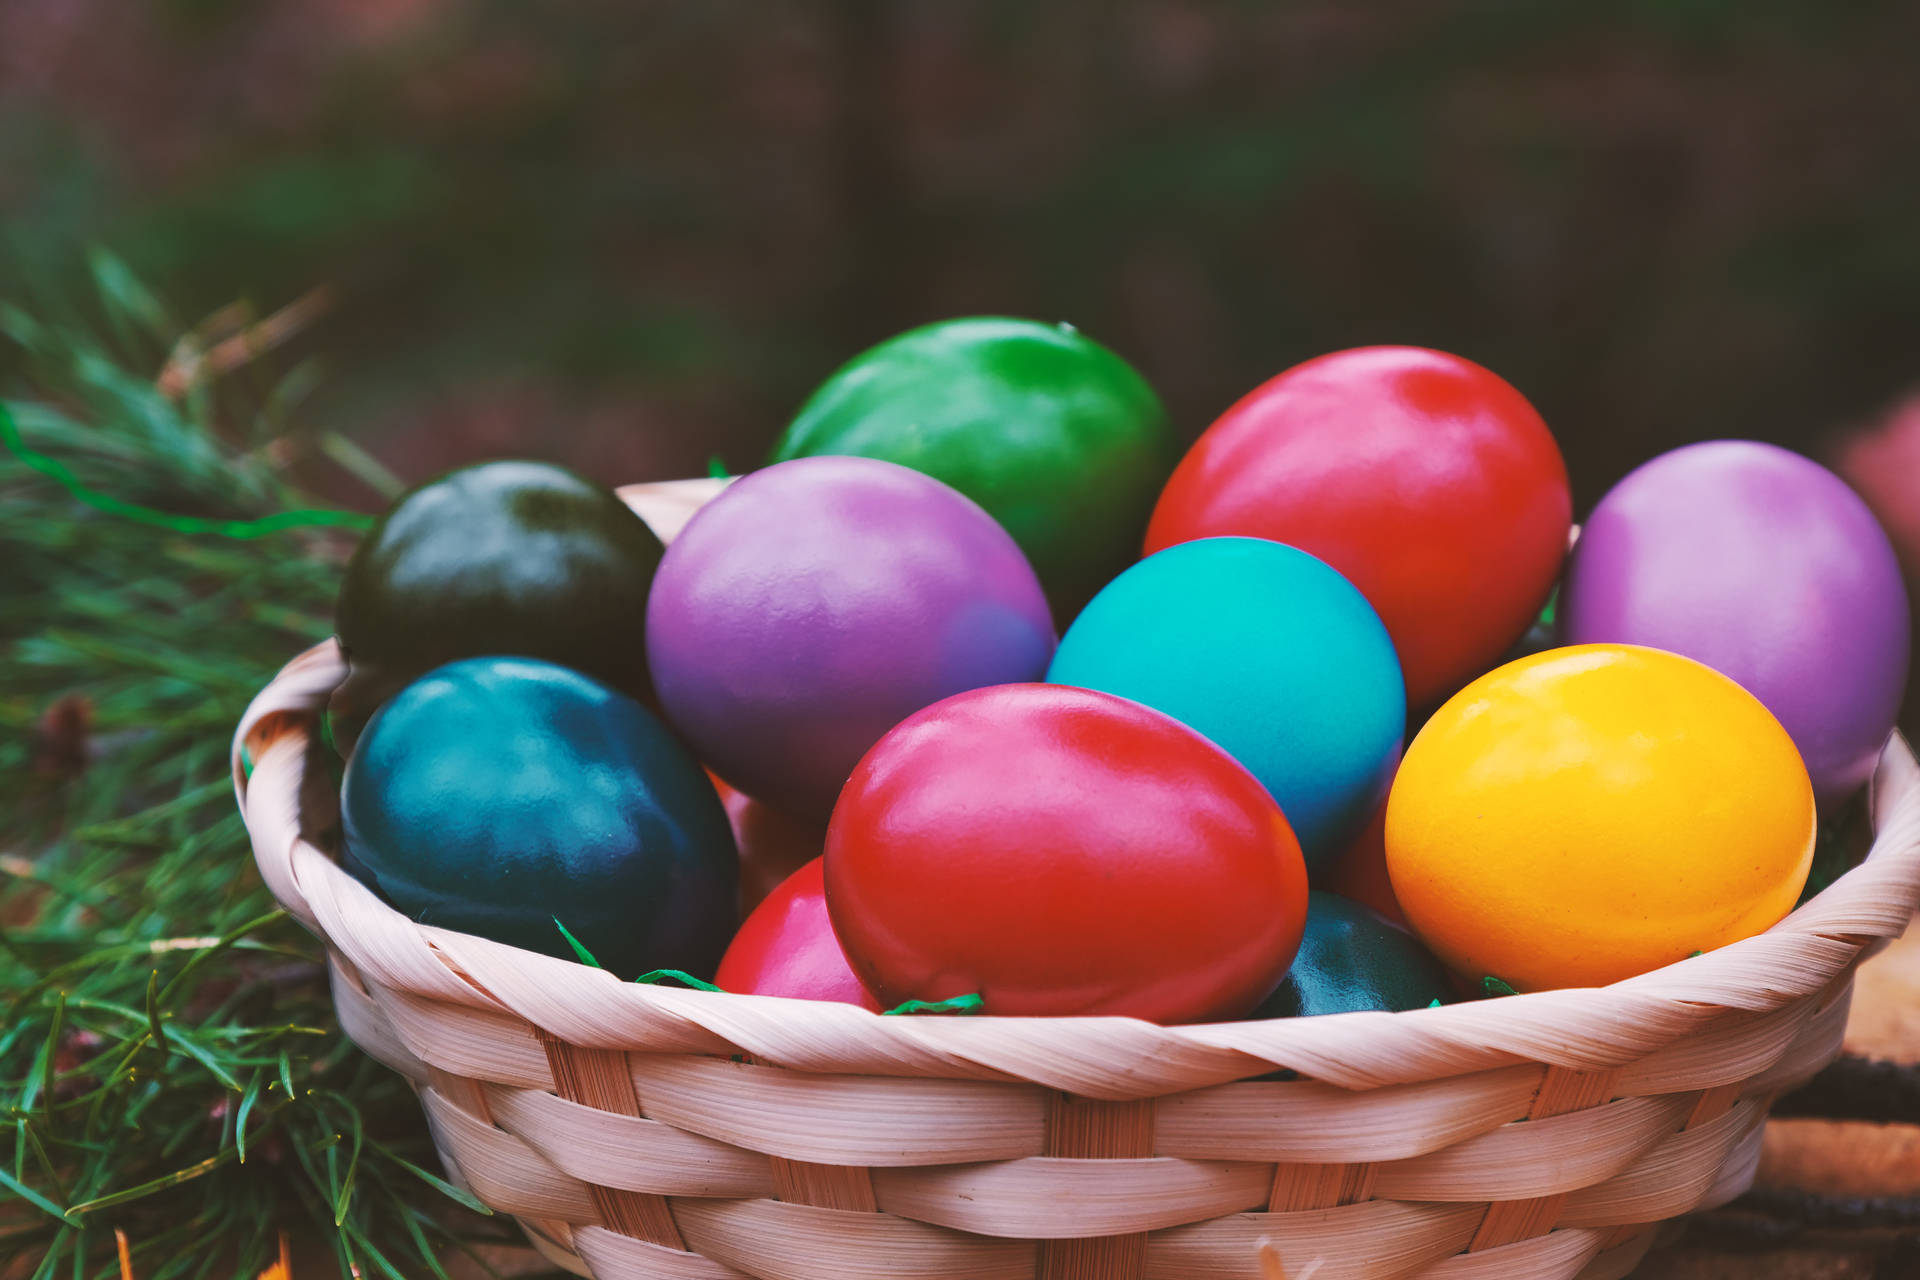 Easter 6240X4160 Wallpaper and Background Image